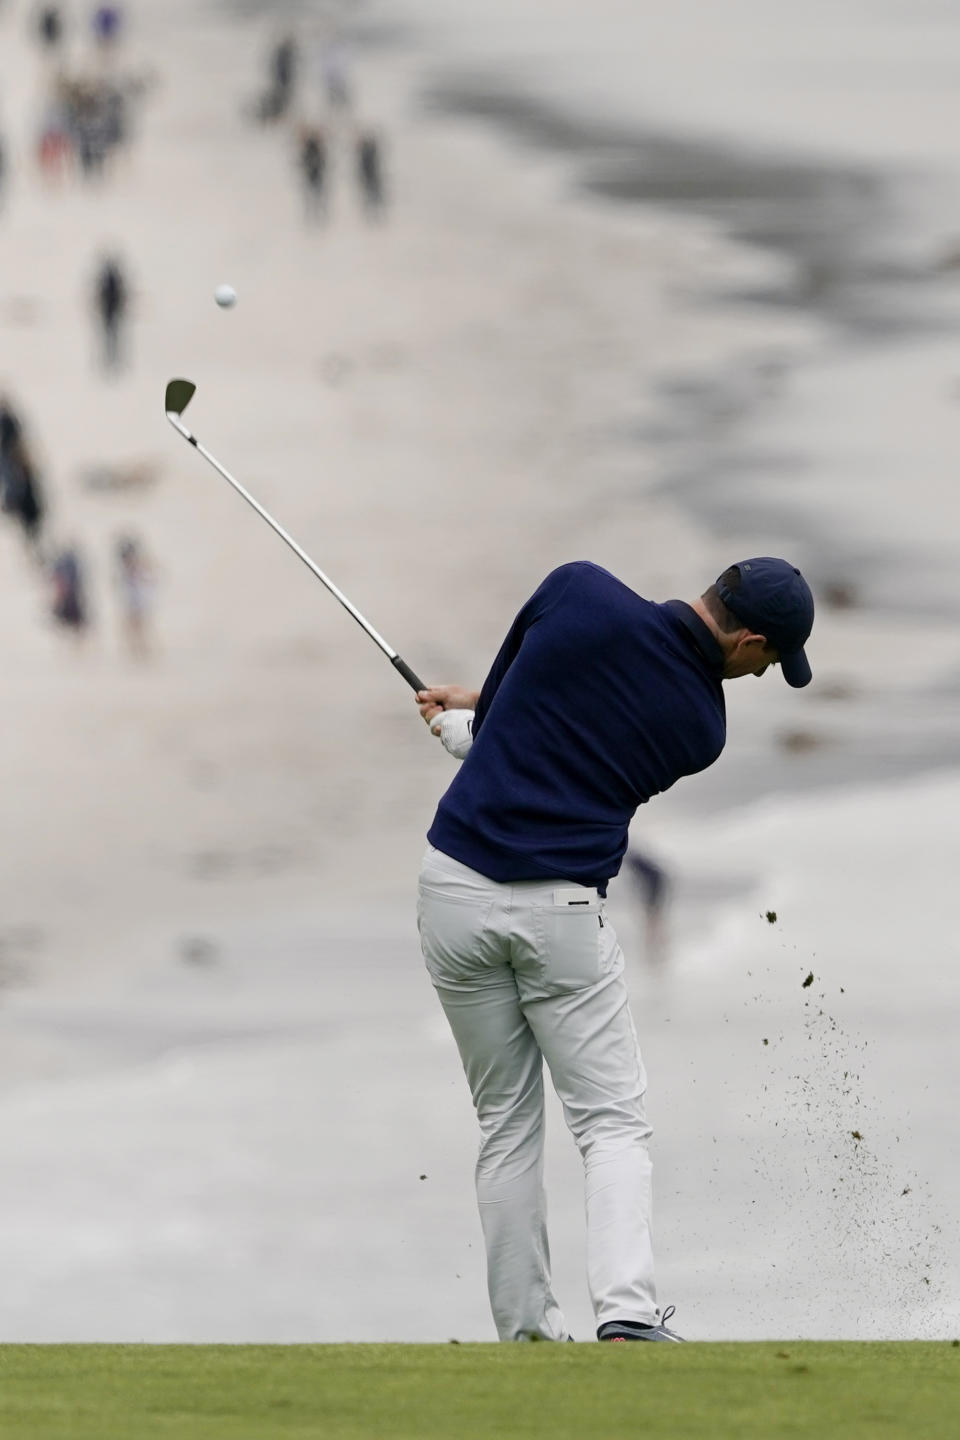 Rory McIlroy, of Northern Ireland, hits from the fairway on the ninth hole during the third round of the U.S. Open golf tournament Saturday, June 15, 2019, in Pebble Beach, Calif. (AP Photo/David J. Phillip)